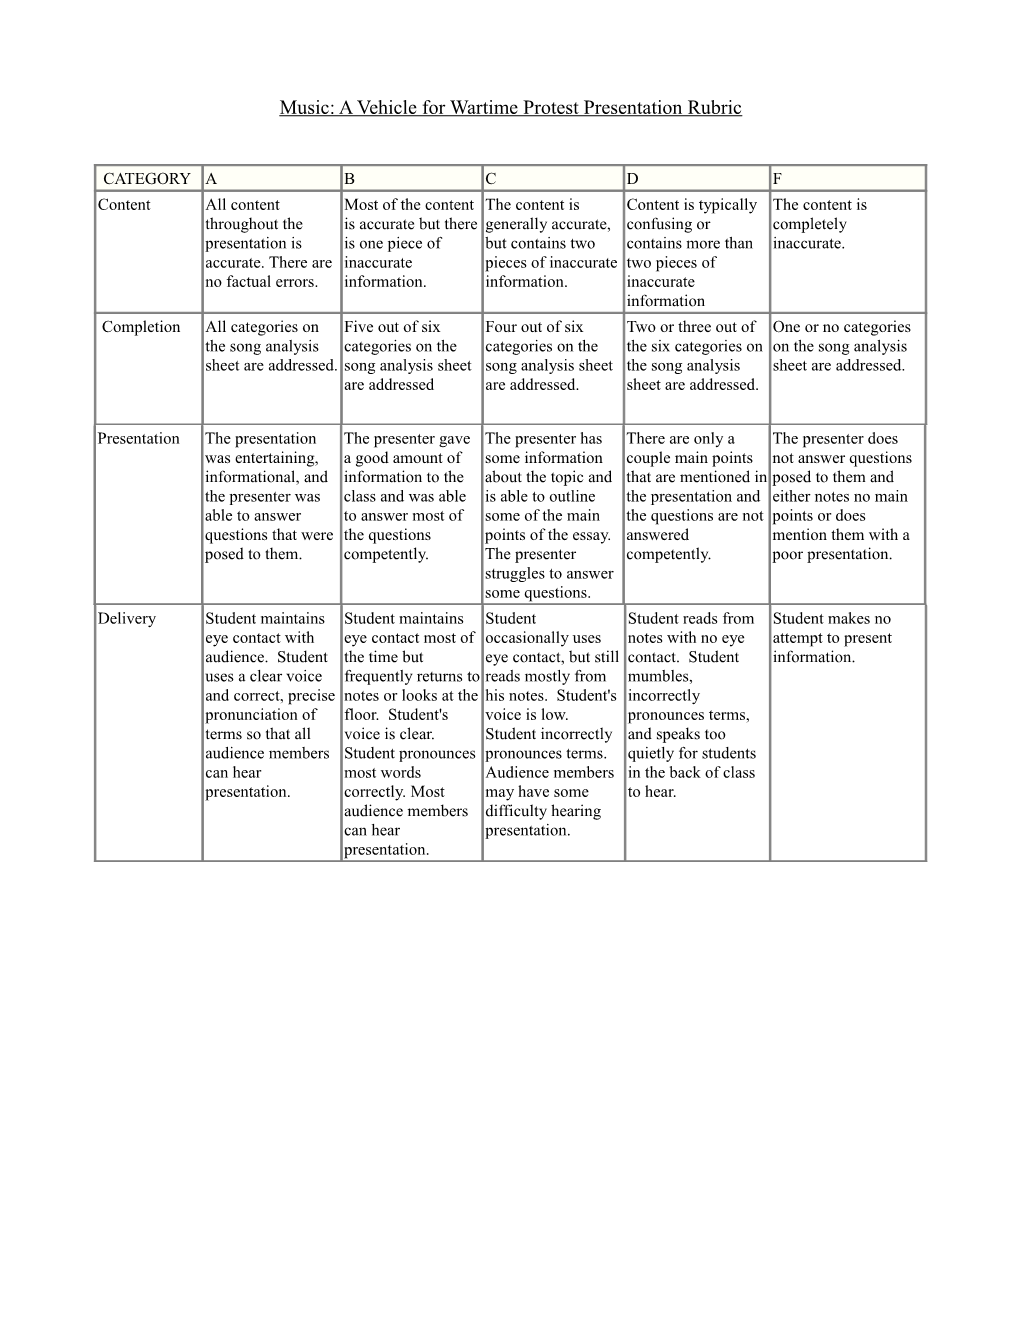 Music: a Vehicle for Wartime Protest Presentation Rubric